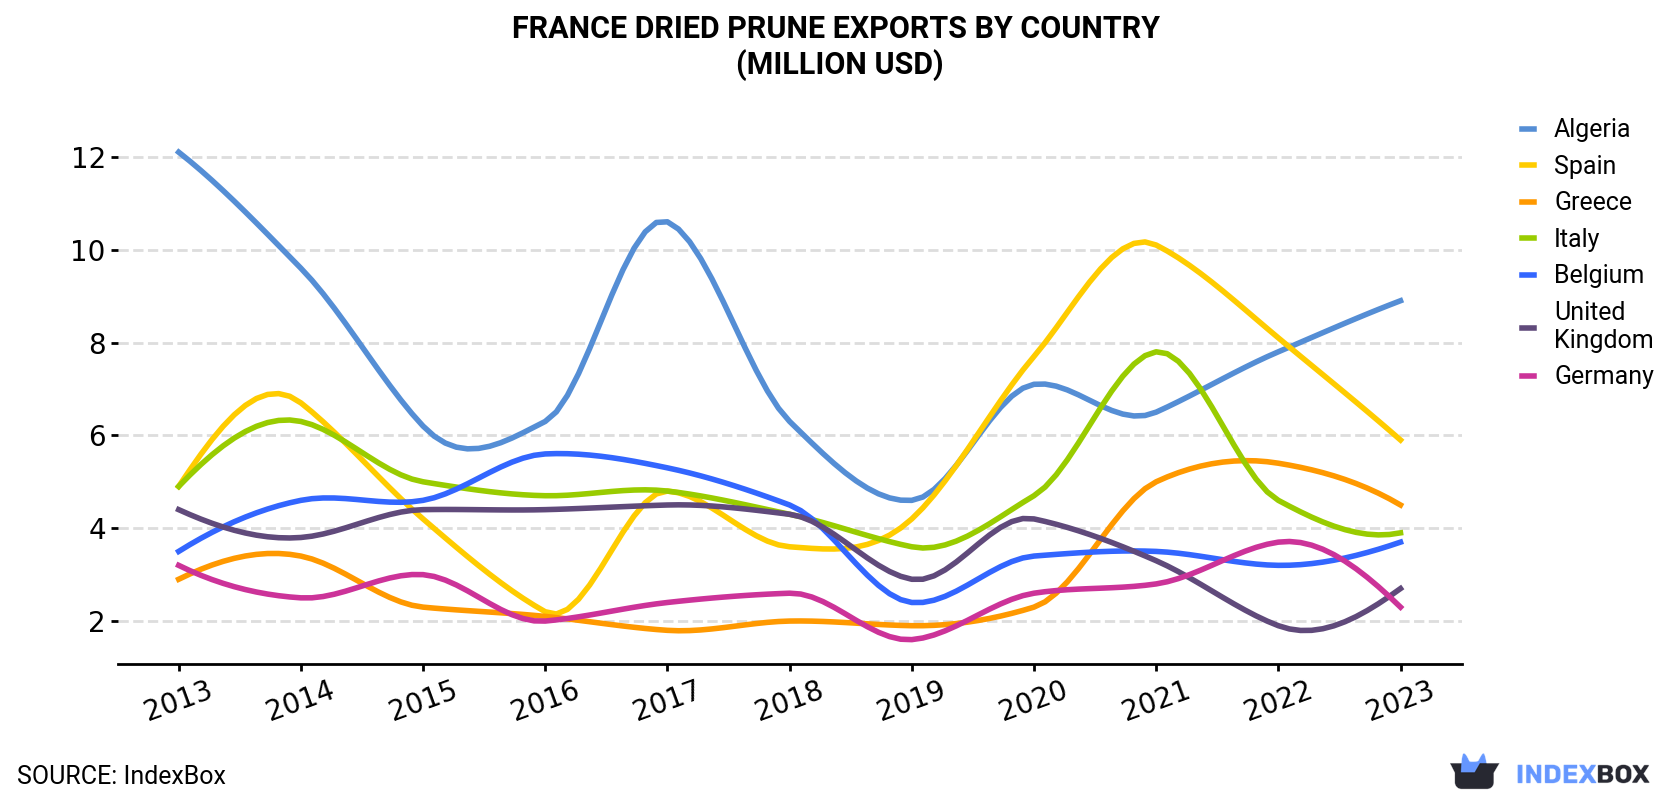 France Dried Prune Exports By Country (Million USD)